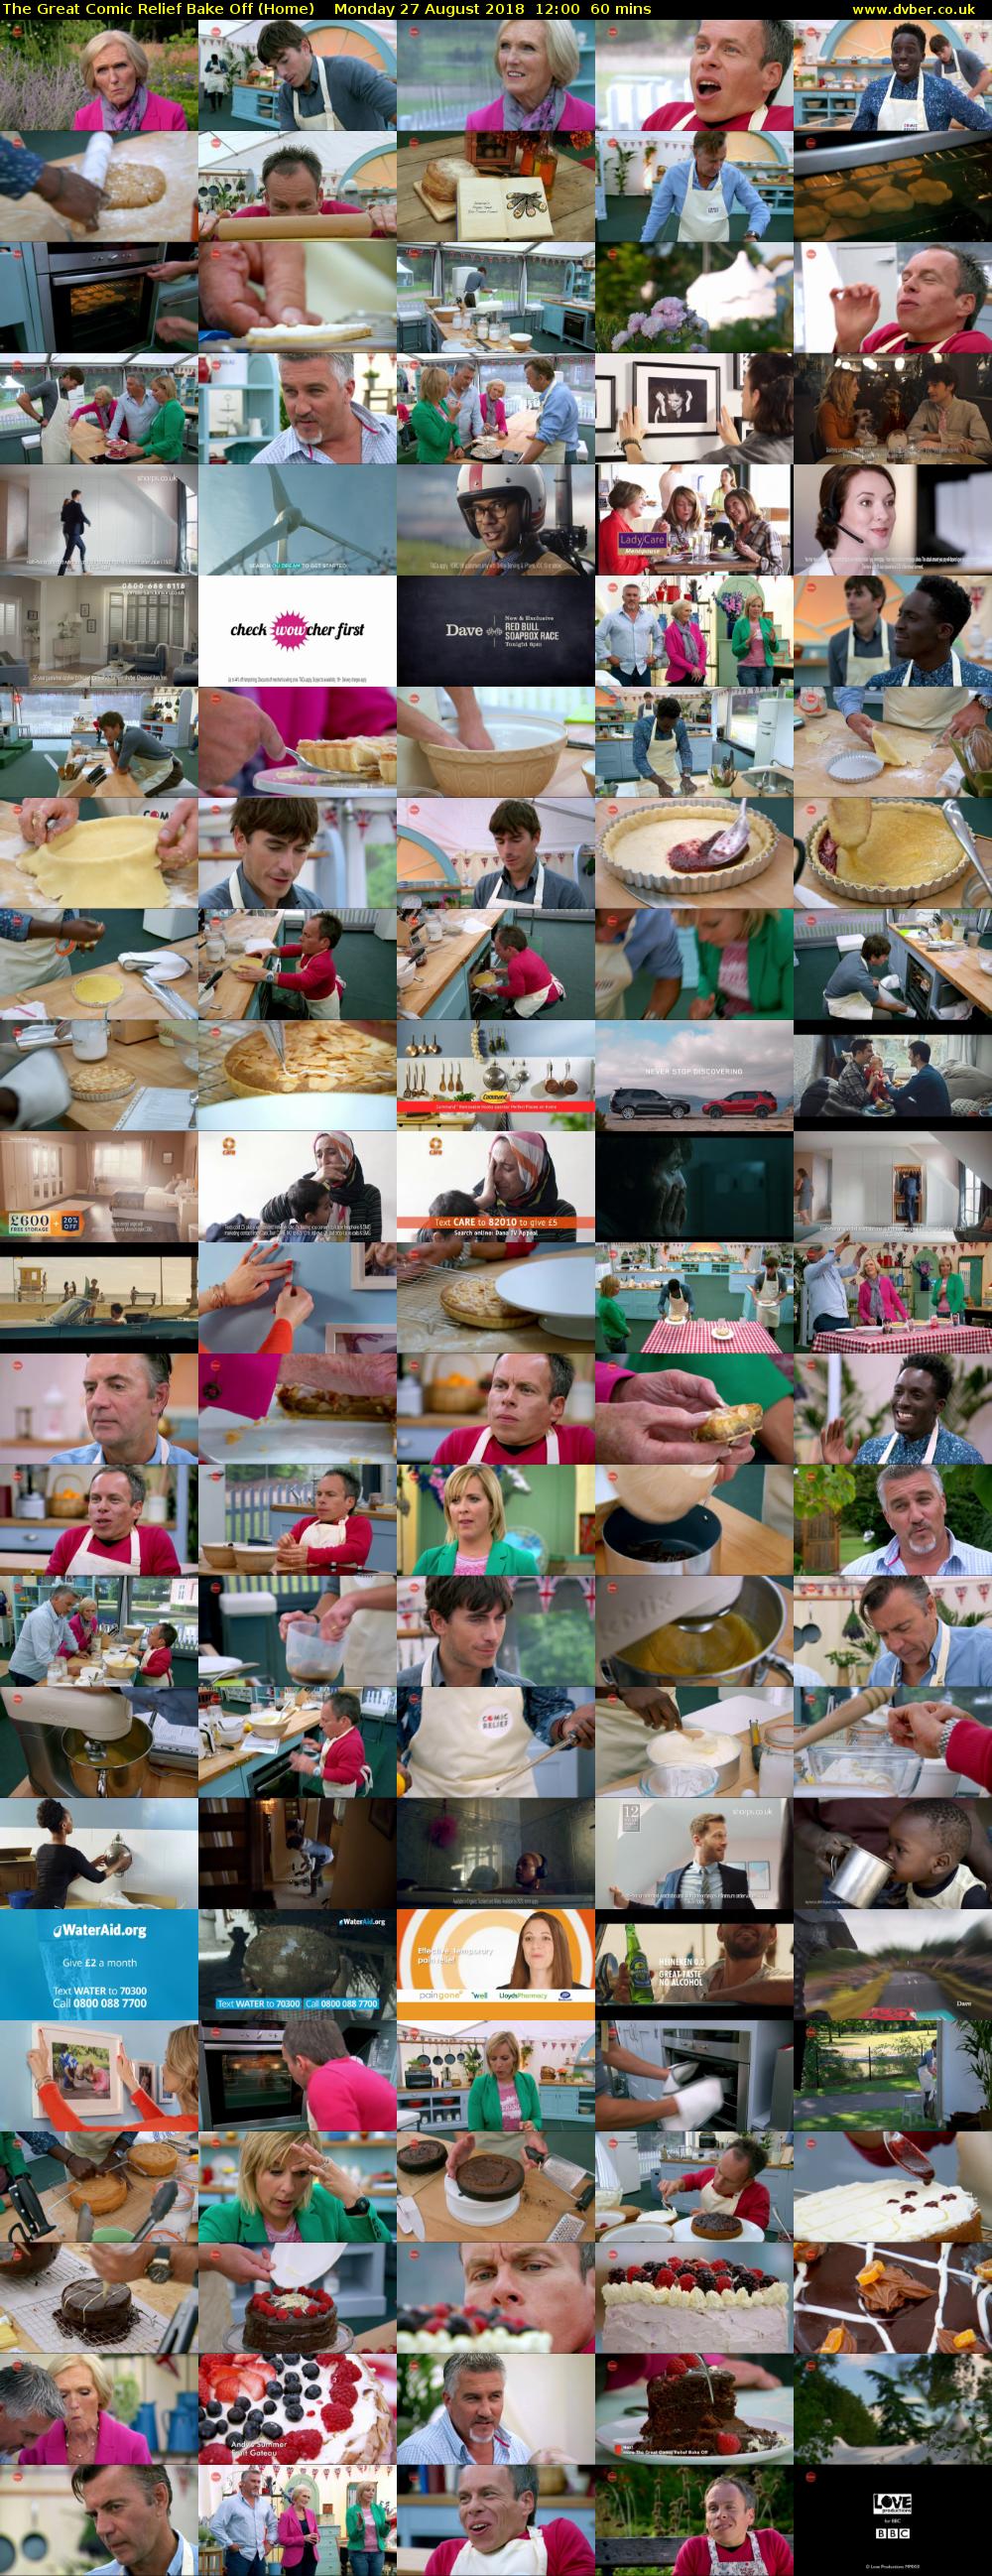 The Great Comic Relief Bake Off (Home) Monday 27 August 2018 12:00 - 13:00